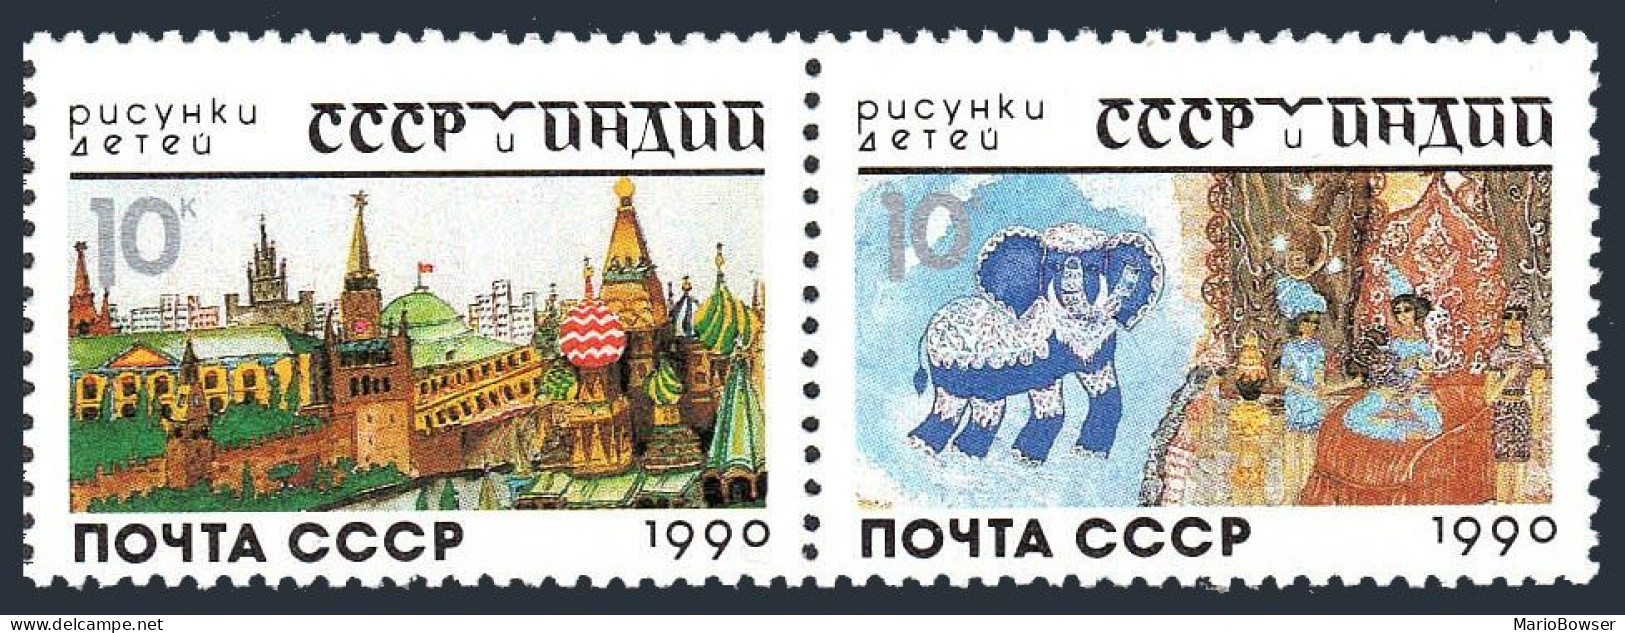 Russia 5925-5926a Pair, MNH. Mi 6121-6122. USSR - India, 1990. Child Drawings. - Unused Stamps